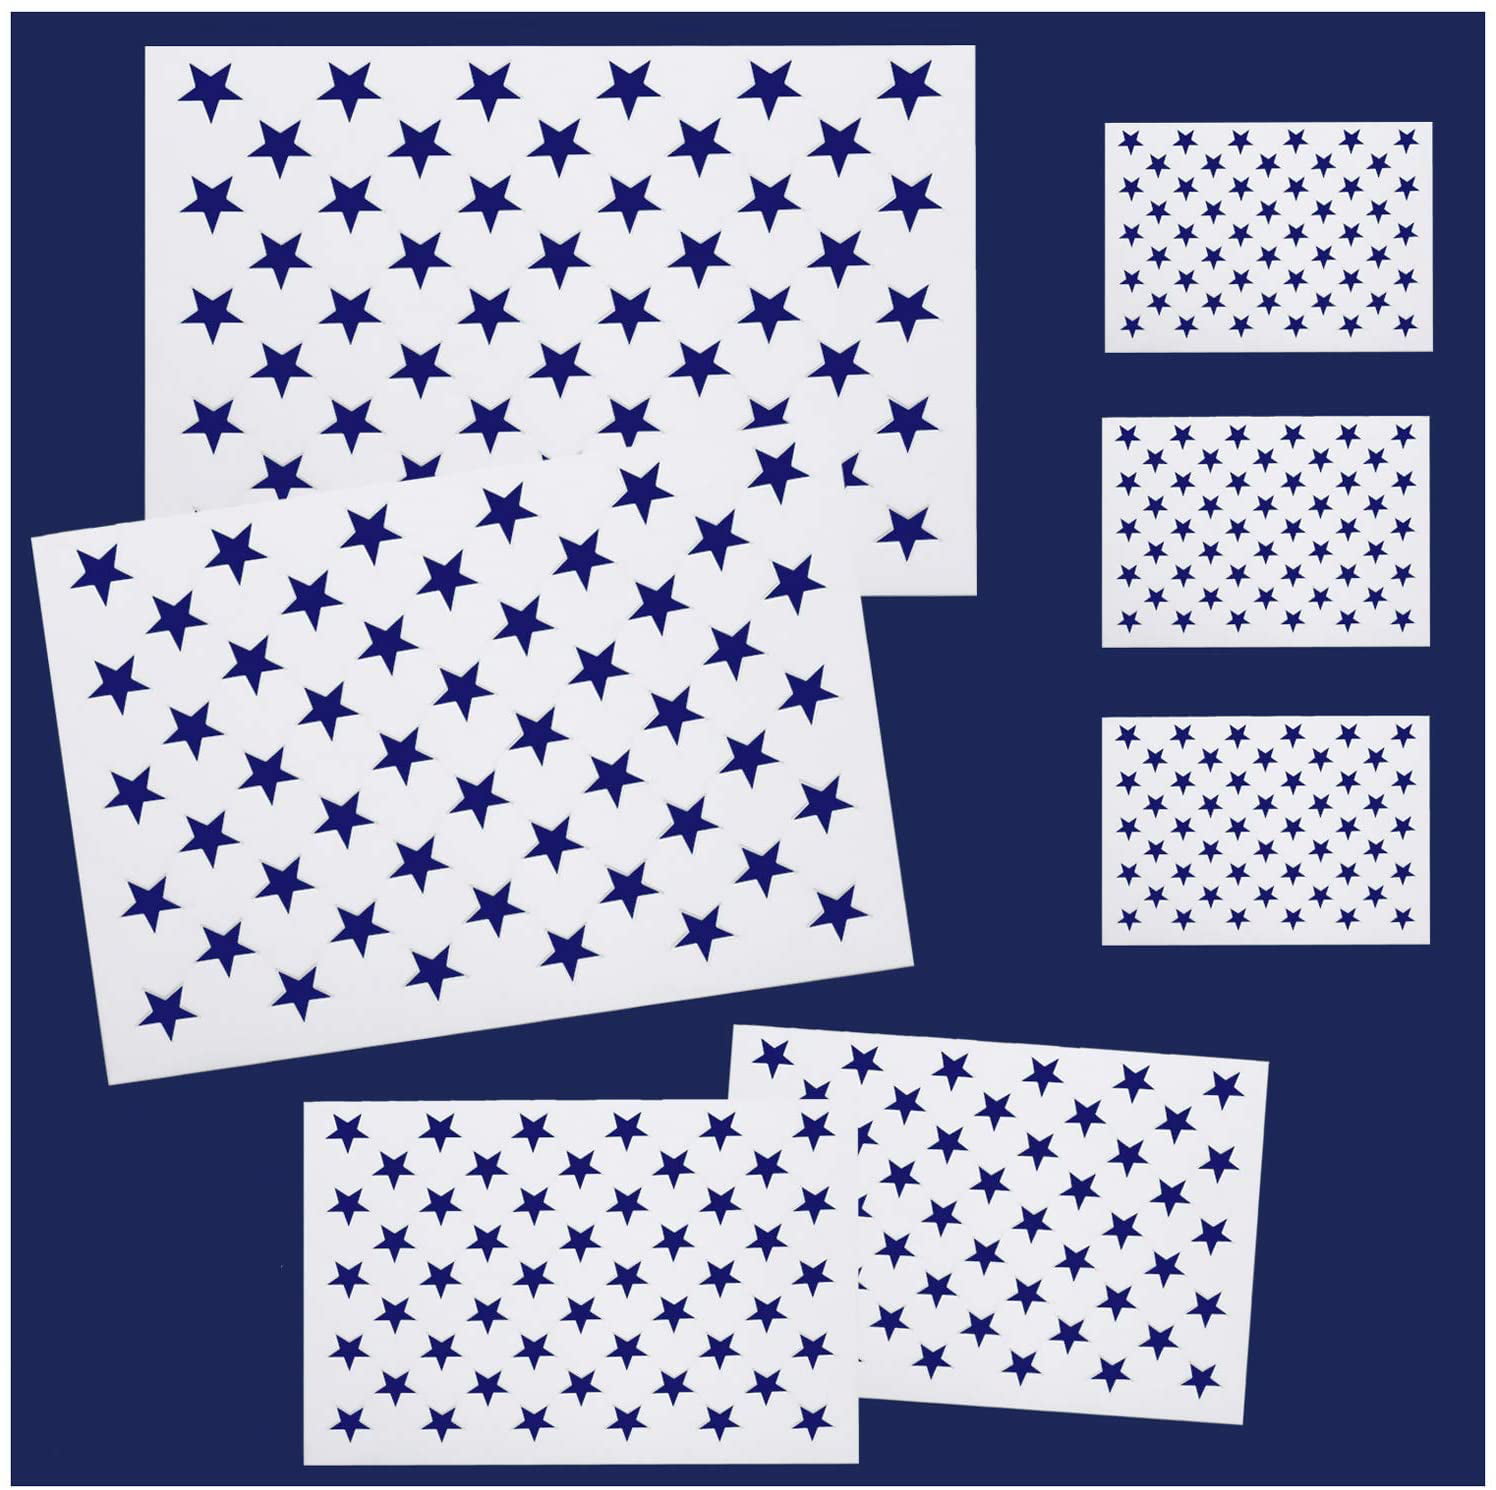 50 Stars Painting Stencil,American Flag Template,Reusable Mylar Star Template for Painting on Wood Paper Fabric Airbrush Walls Art DIY 